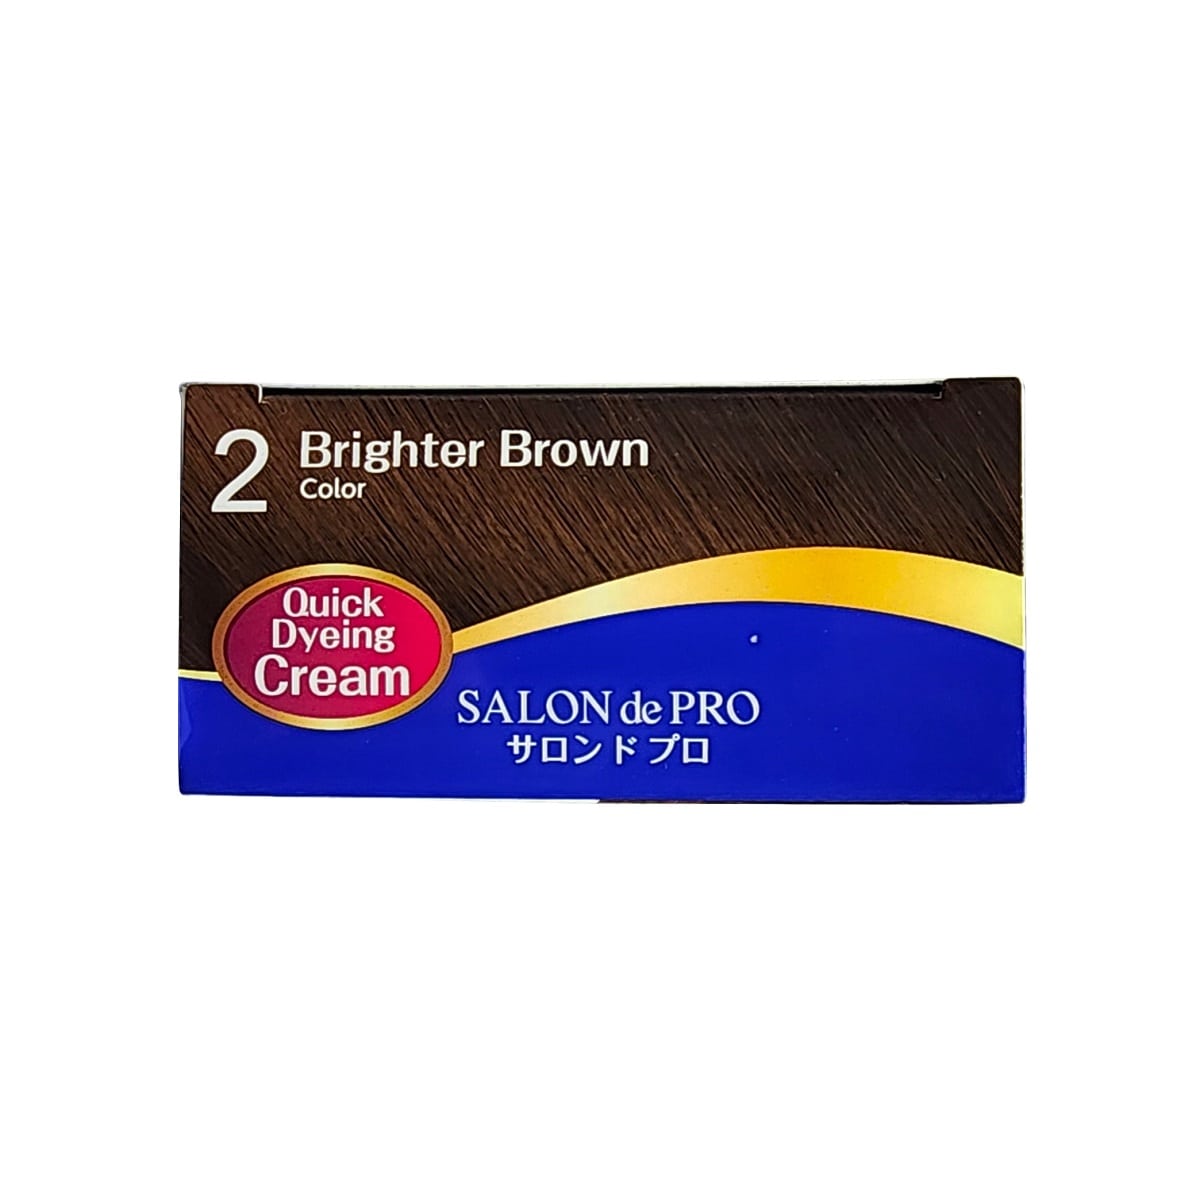 Colour swatch for Salon de Pro Hair Dye without Smell #2 Brighter Brown